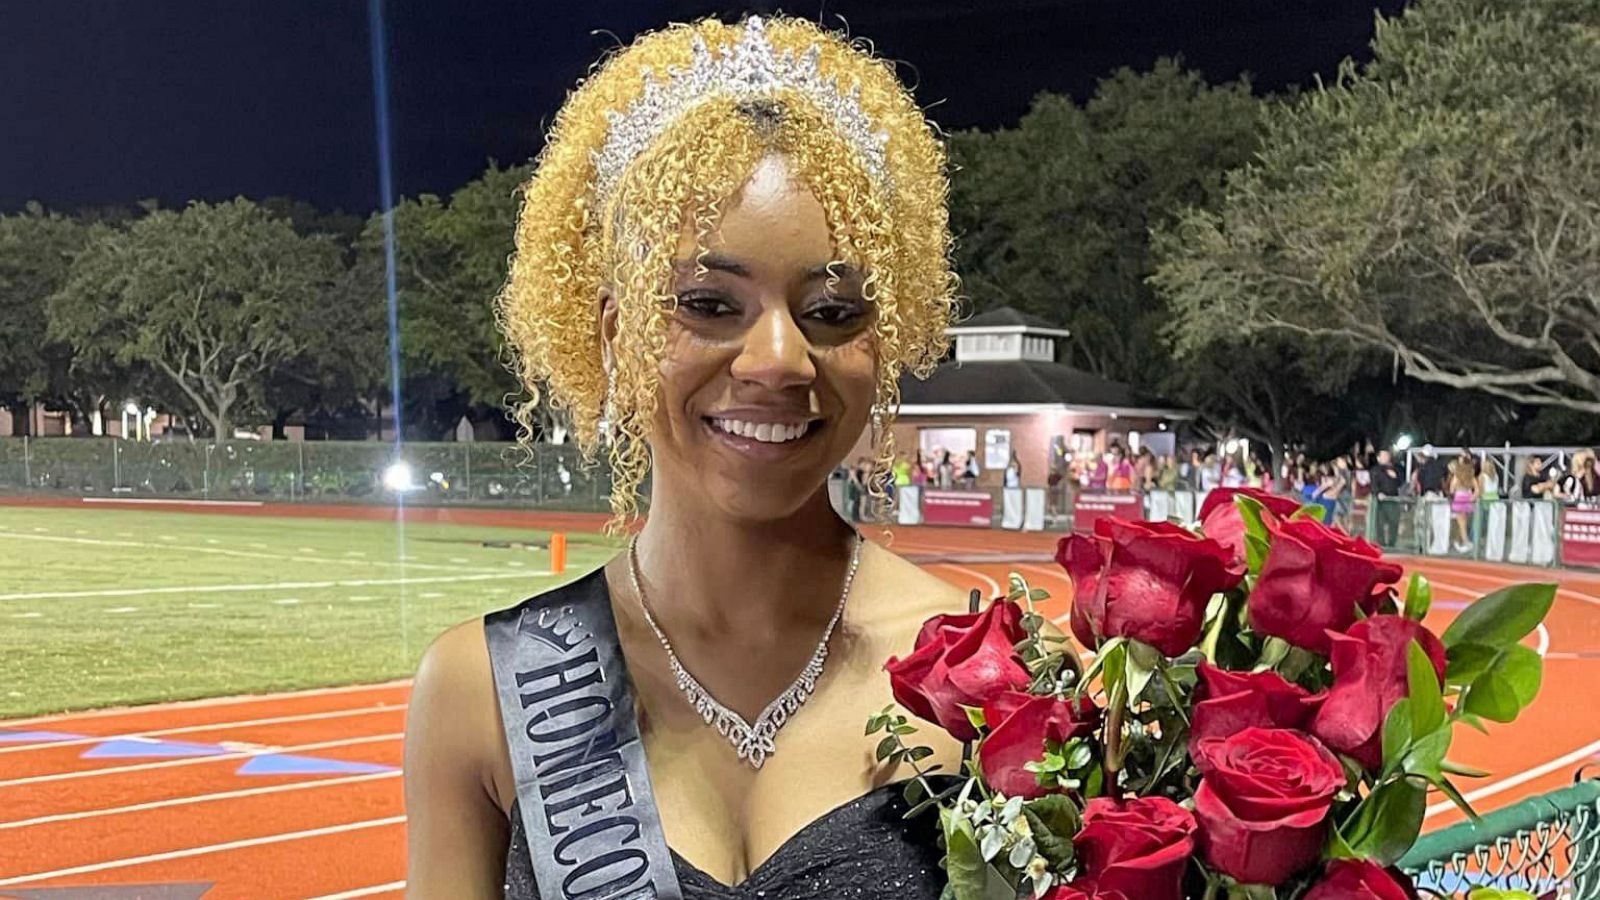 South Carolina teen elected first Black homecoming queen in